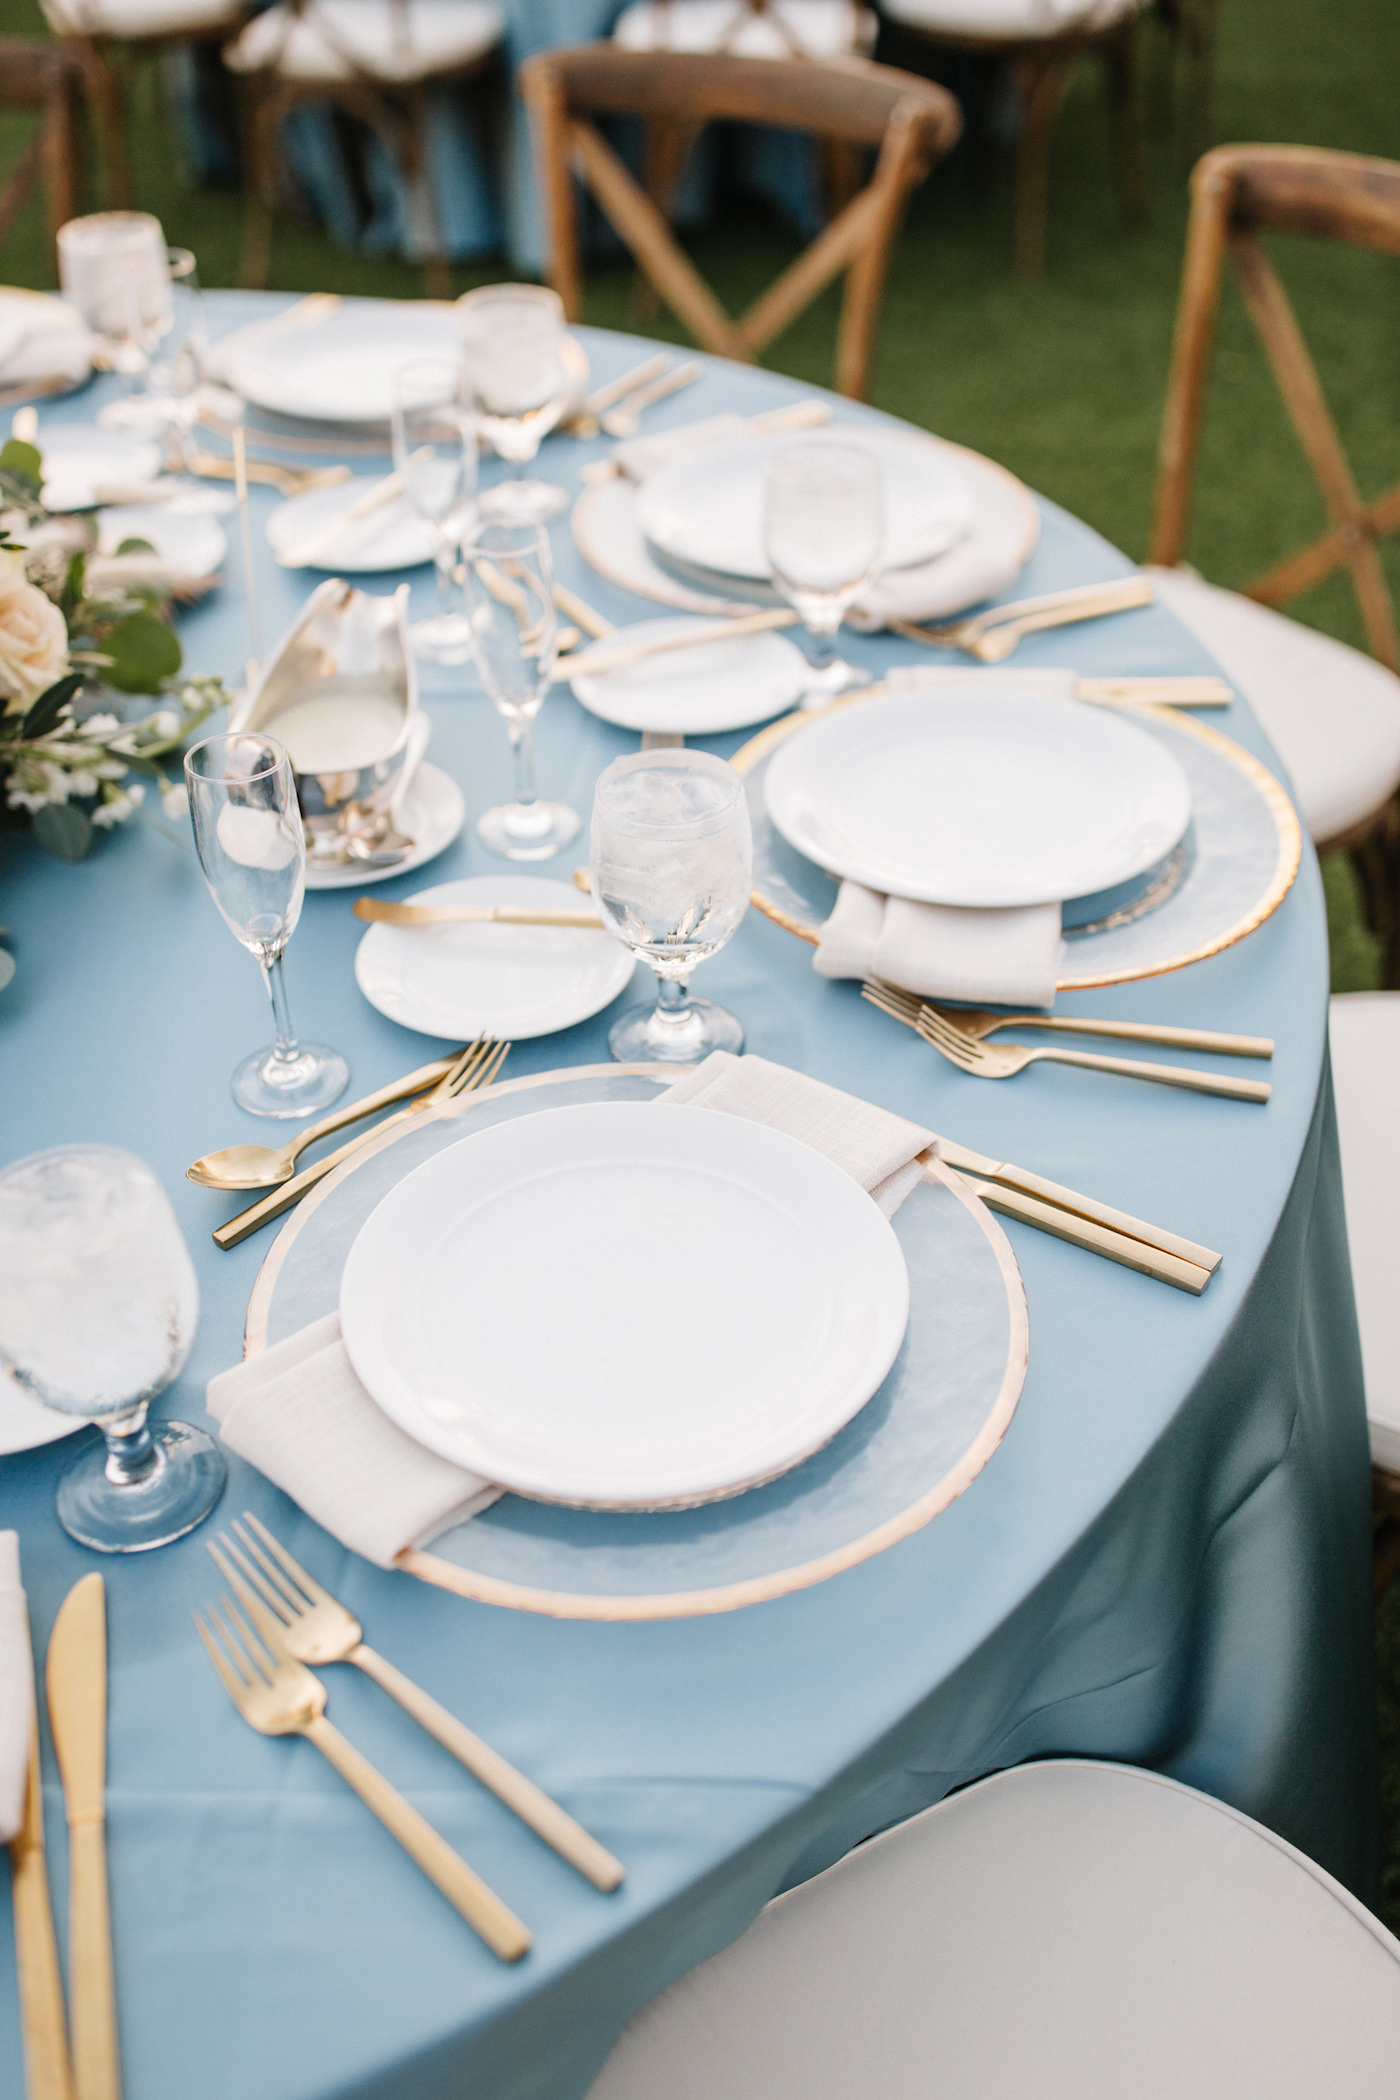 Modern, Bohemian Boho Chic Wedding Reception and Decor, Low Floral Centerpieces, Clear Chargers with Gold Rim and Gold Flatware, SDusty Blue Table Linen | Downtown St. Pete Wedding Planner Parties A’ La Carte | Florida Wedding Rental Company Over the Top Rental Linens, A Chair Affair